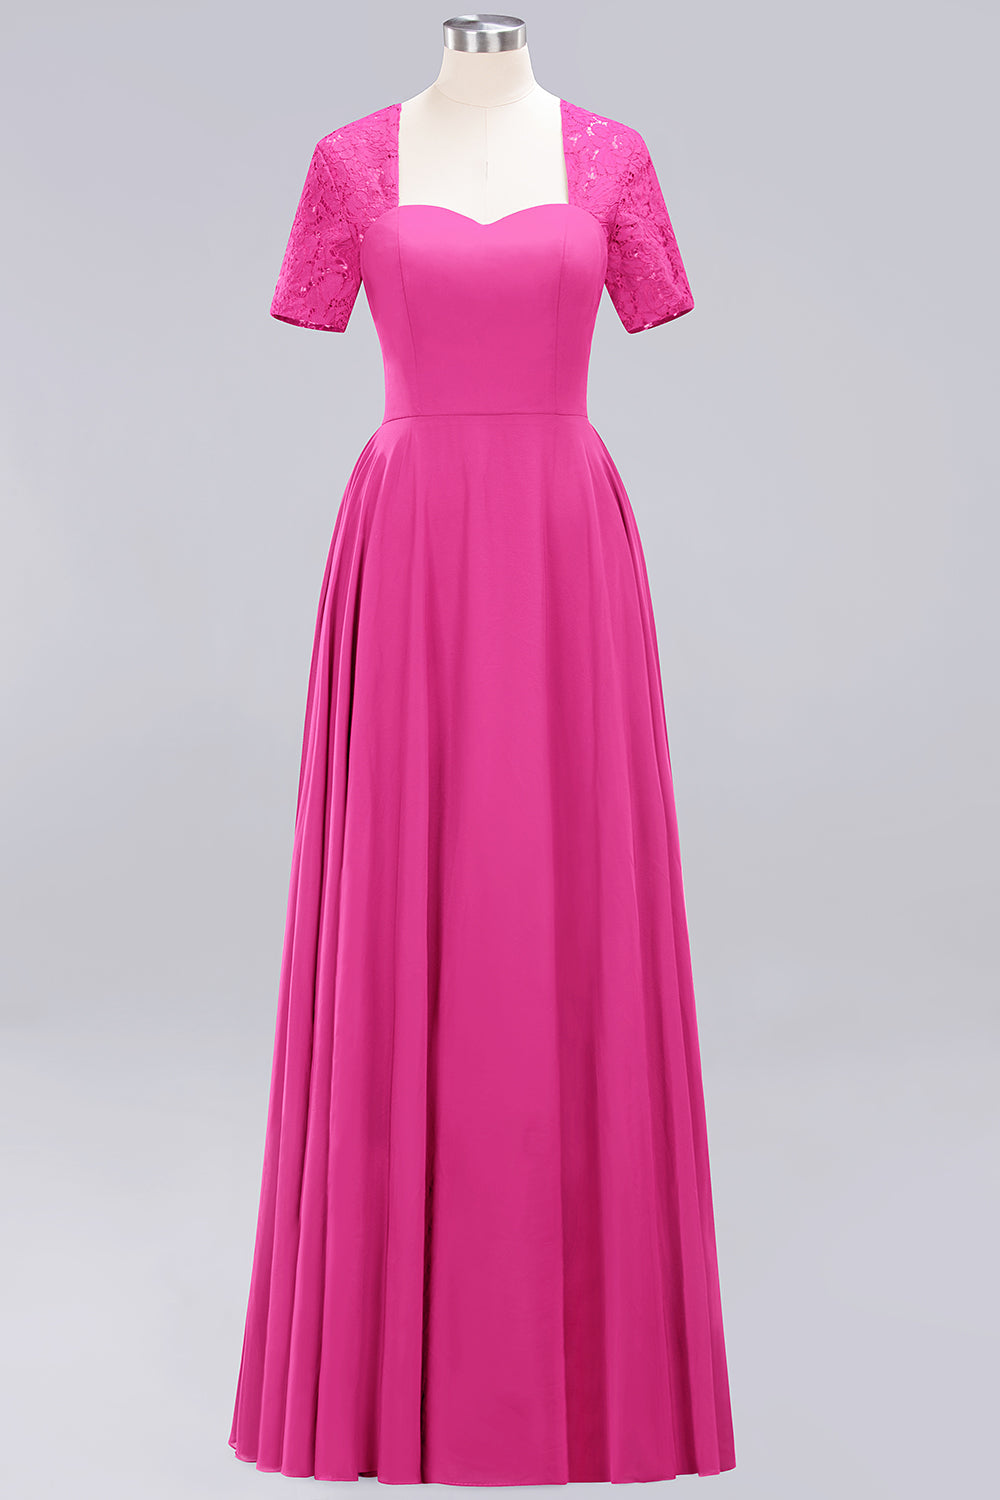 Long A-Line Chiffon Square Bridesmaid Dress with Sleeves-BIZTUNNEL